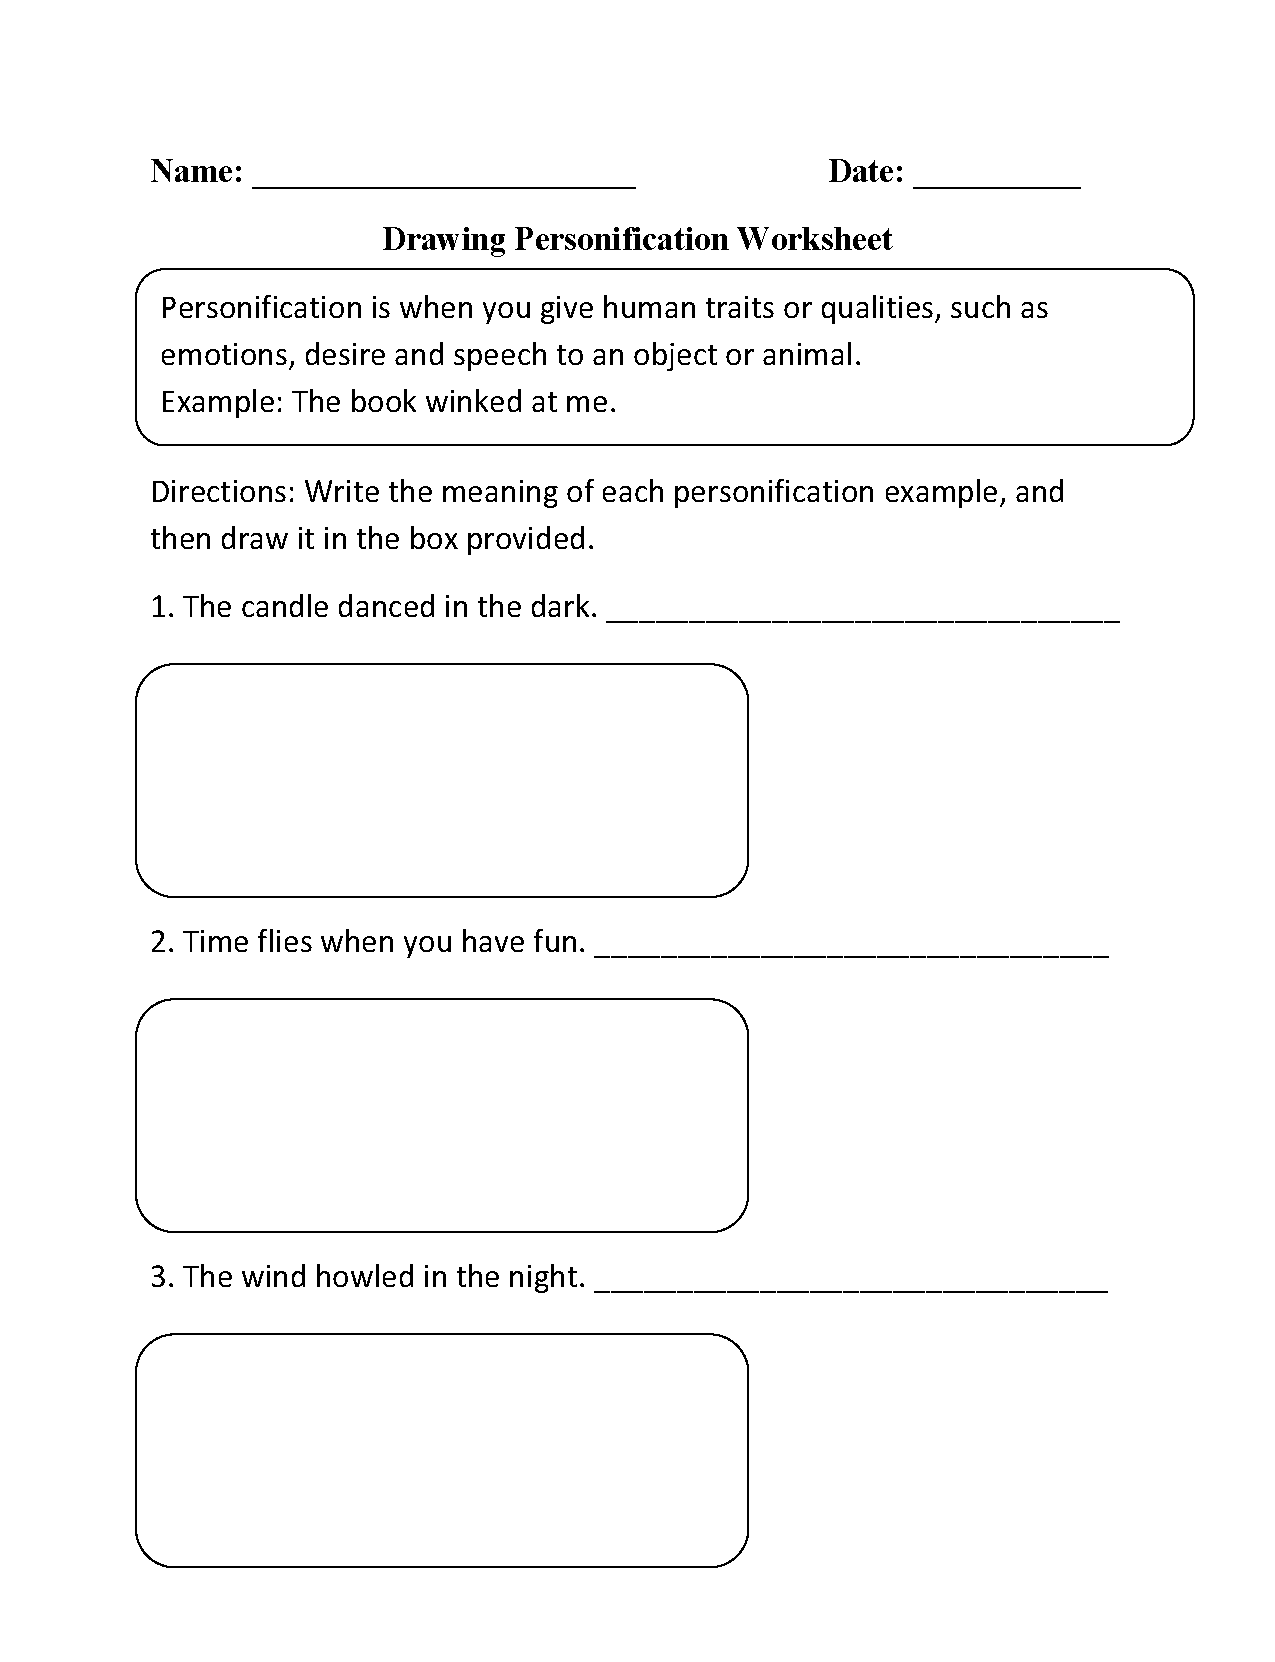 Drawing Personifcation Worksheet